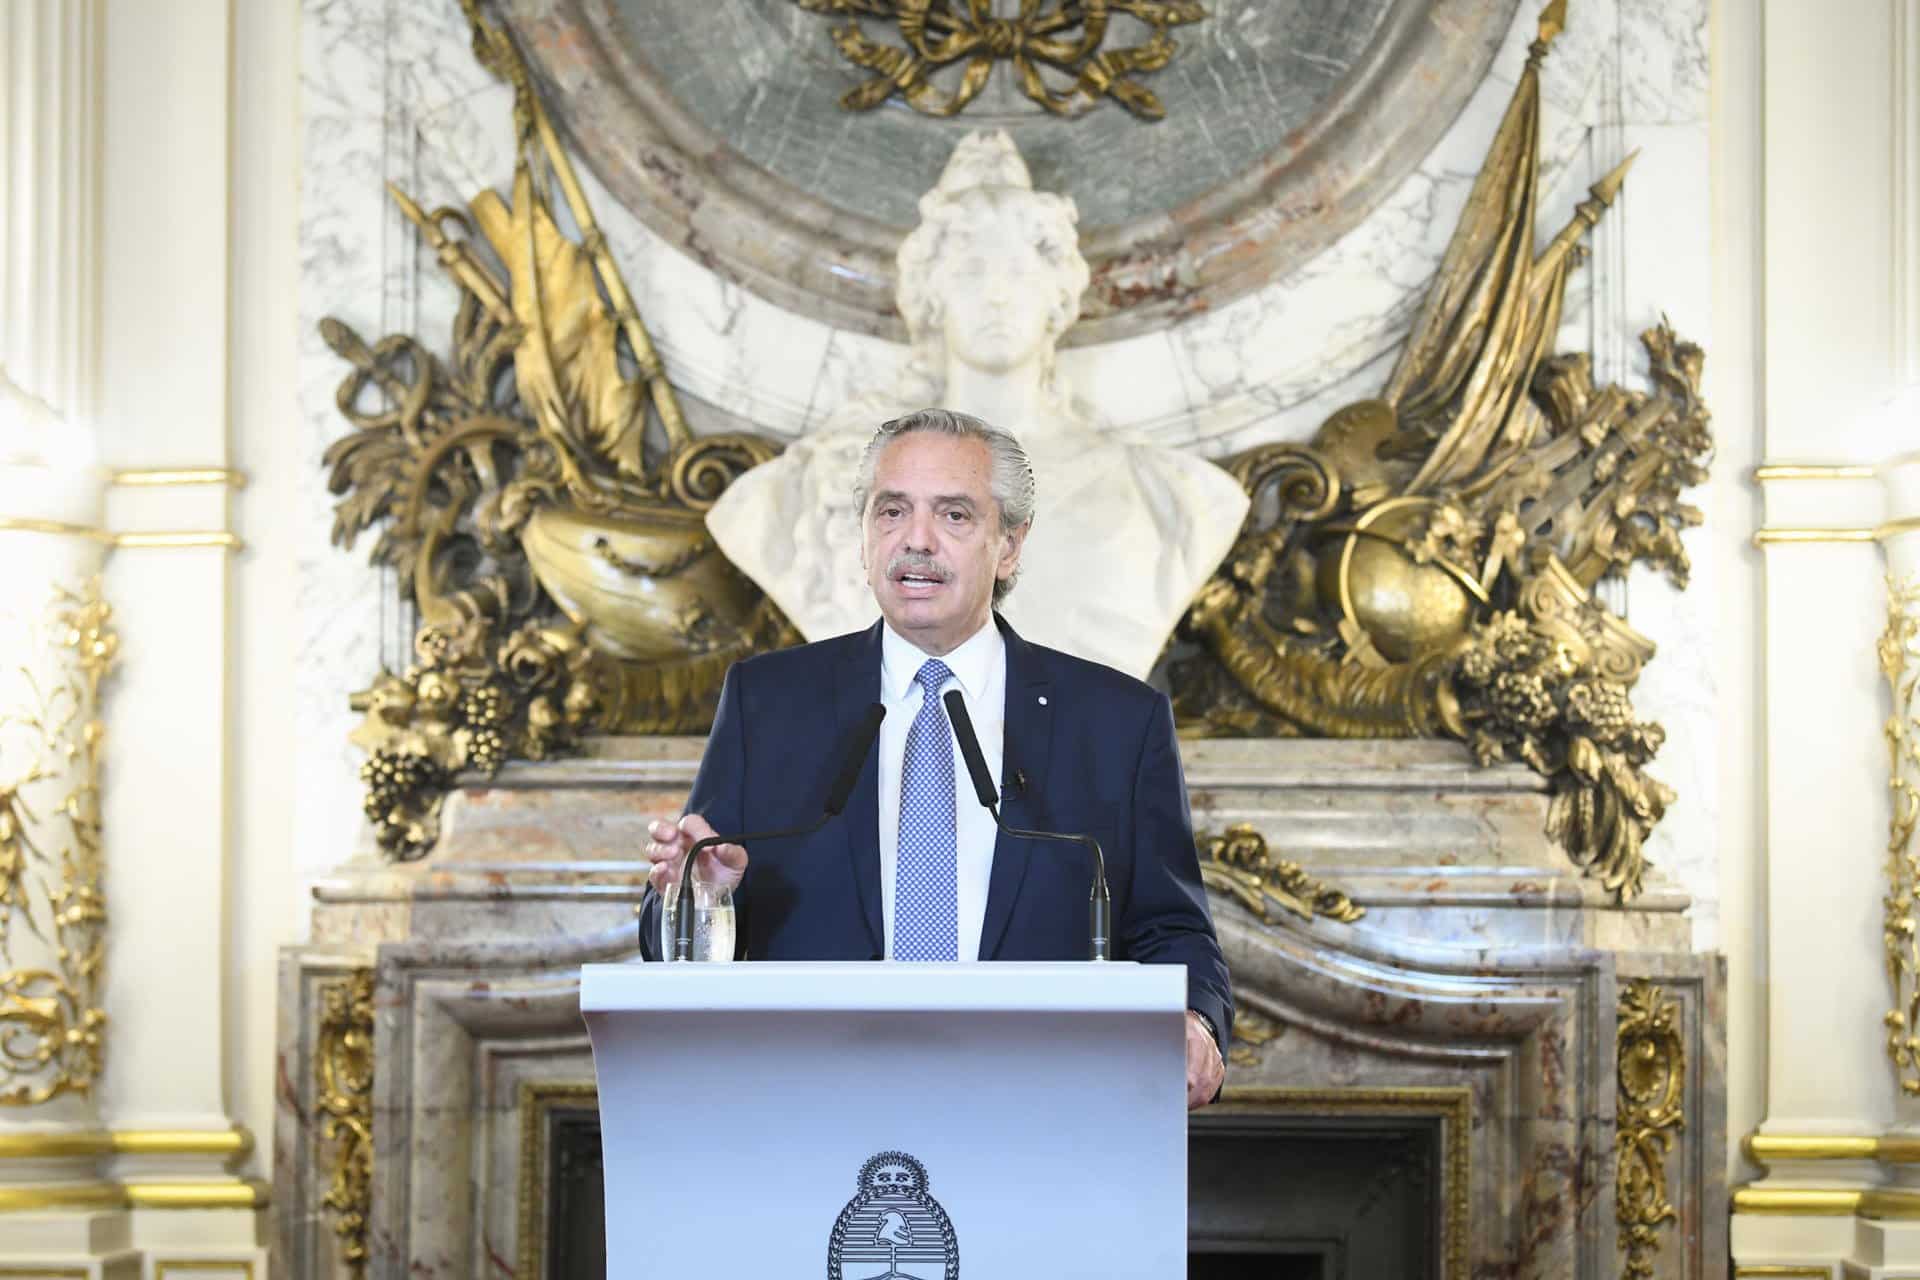 President Alberto Fernández of Argentina emphasized that his country needs honest officials, free from corruption, and honest judges. Photo: EFE.